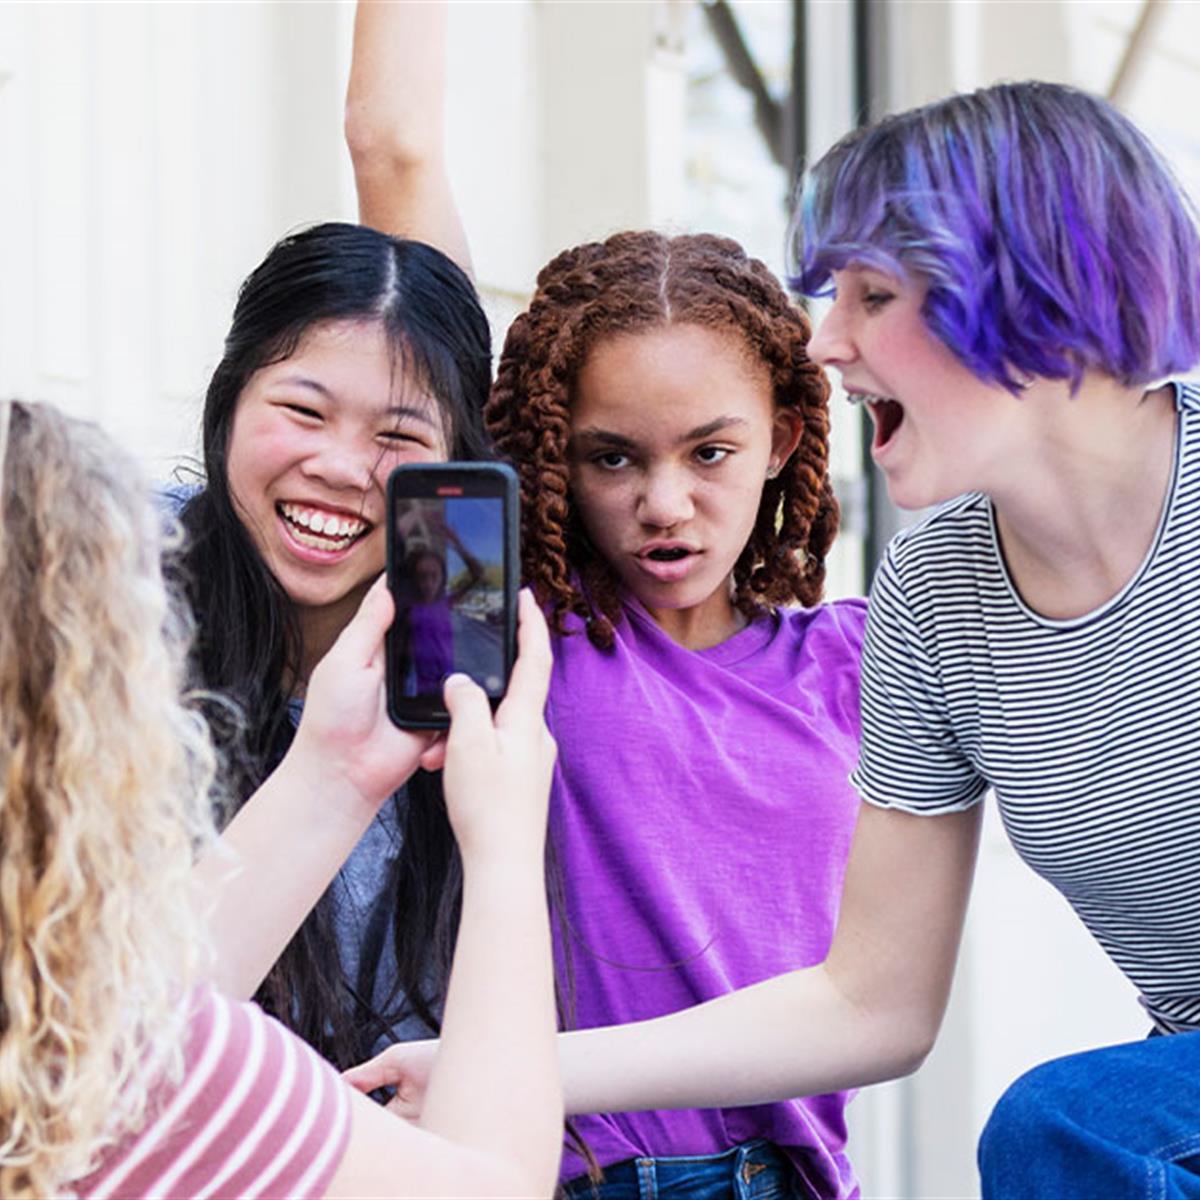 Teen Life on Social Media in 2022: Connection, Creativity and